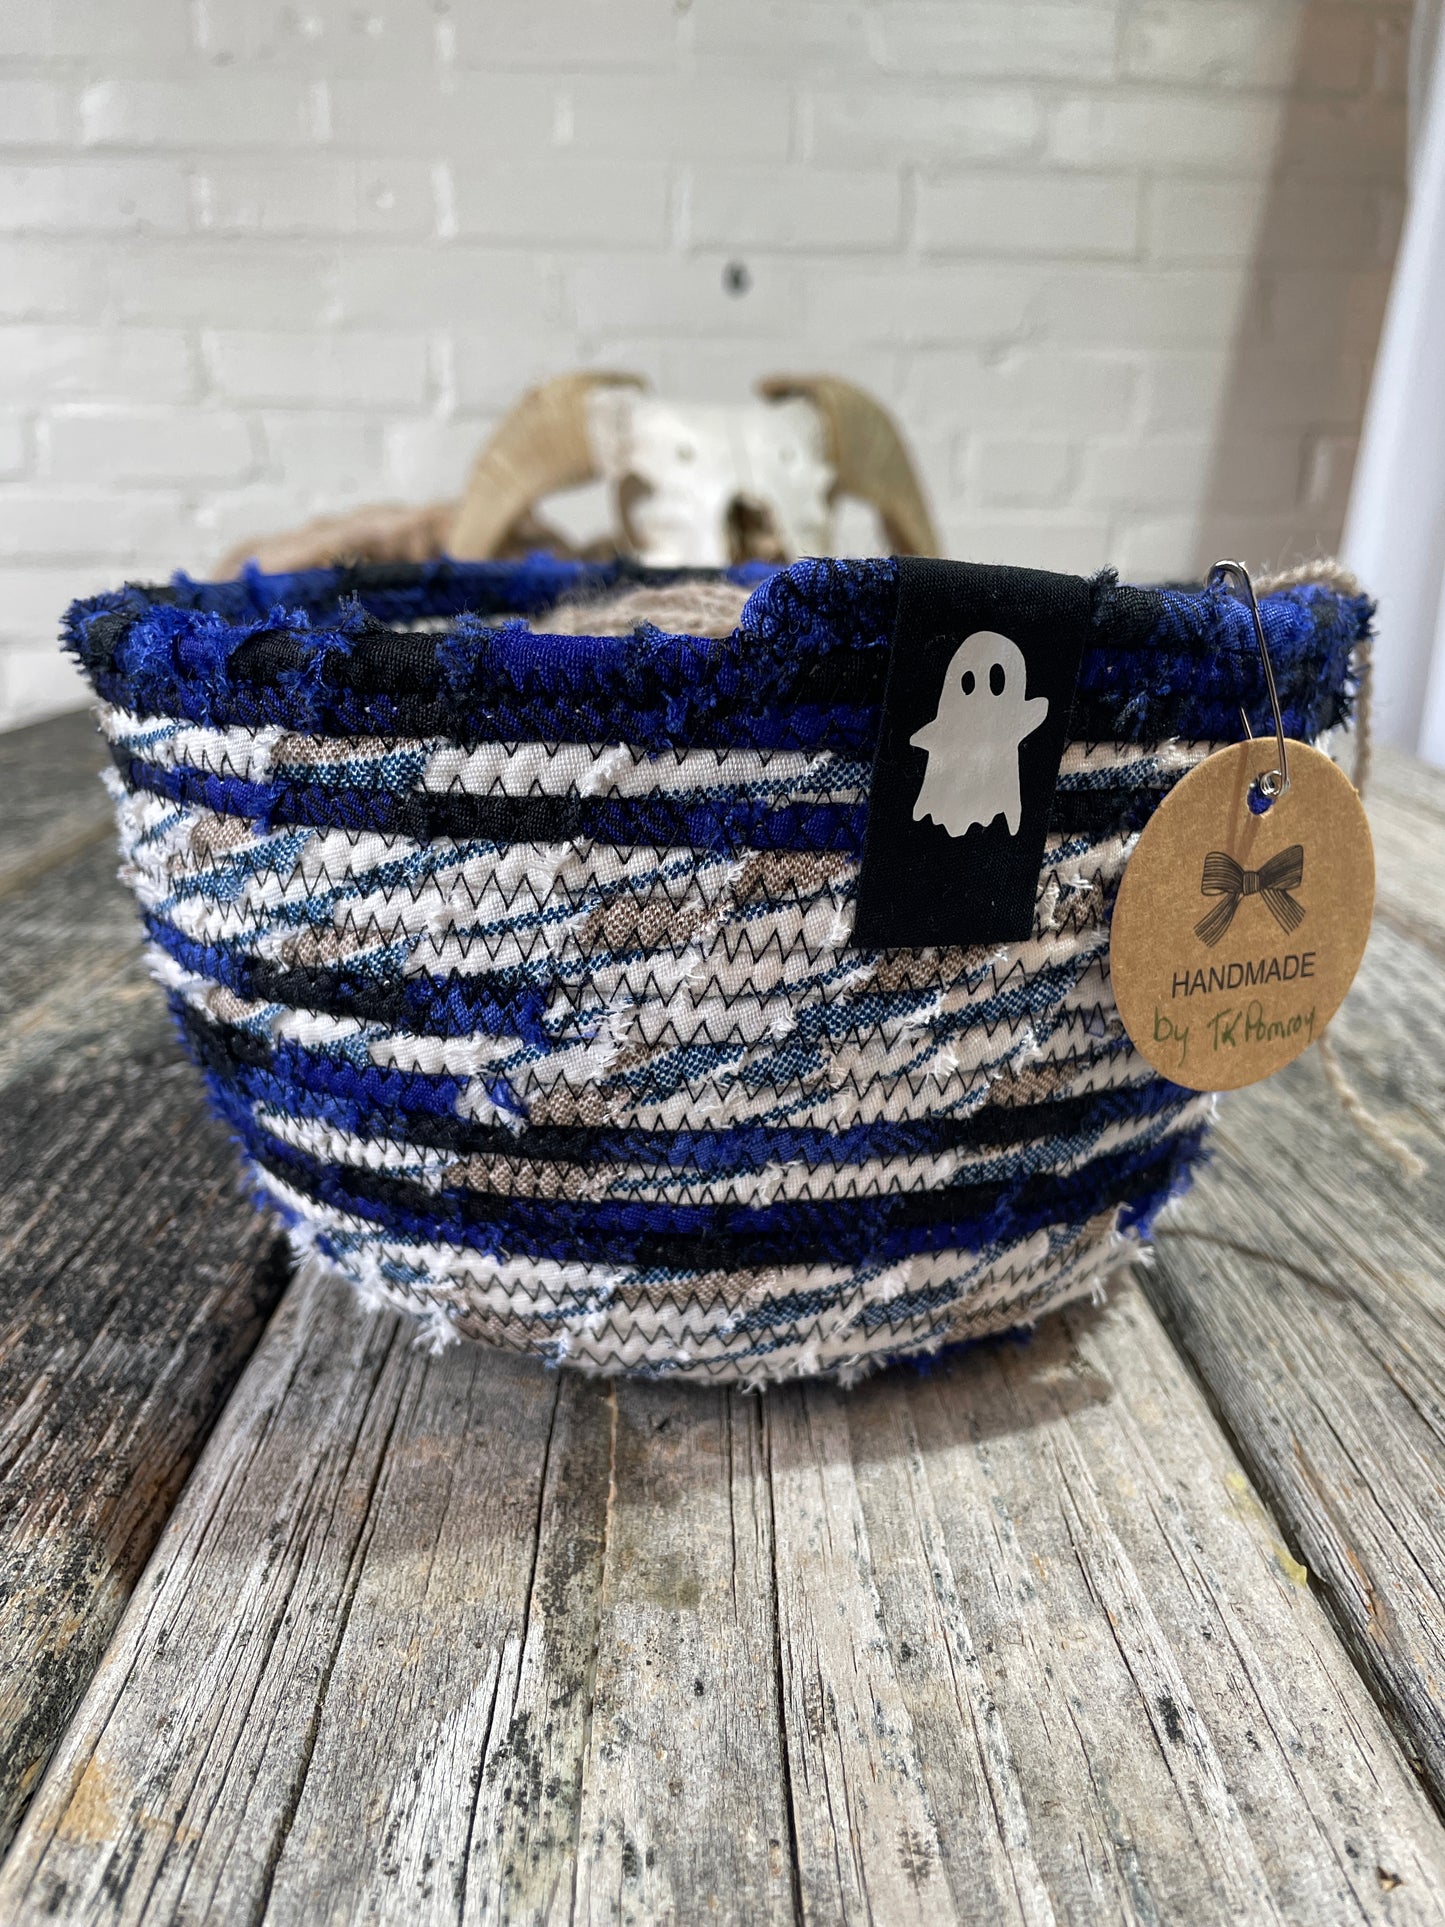 Jutila & Bandana - Handmade Fabric/Rope Project Bowls by TkPomroy/The Wooly Ghost